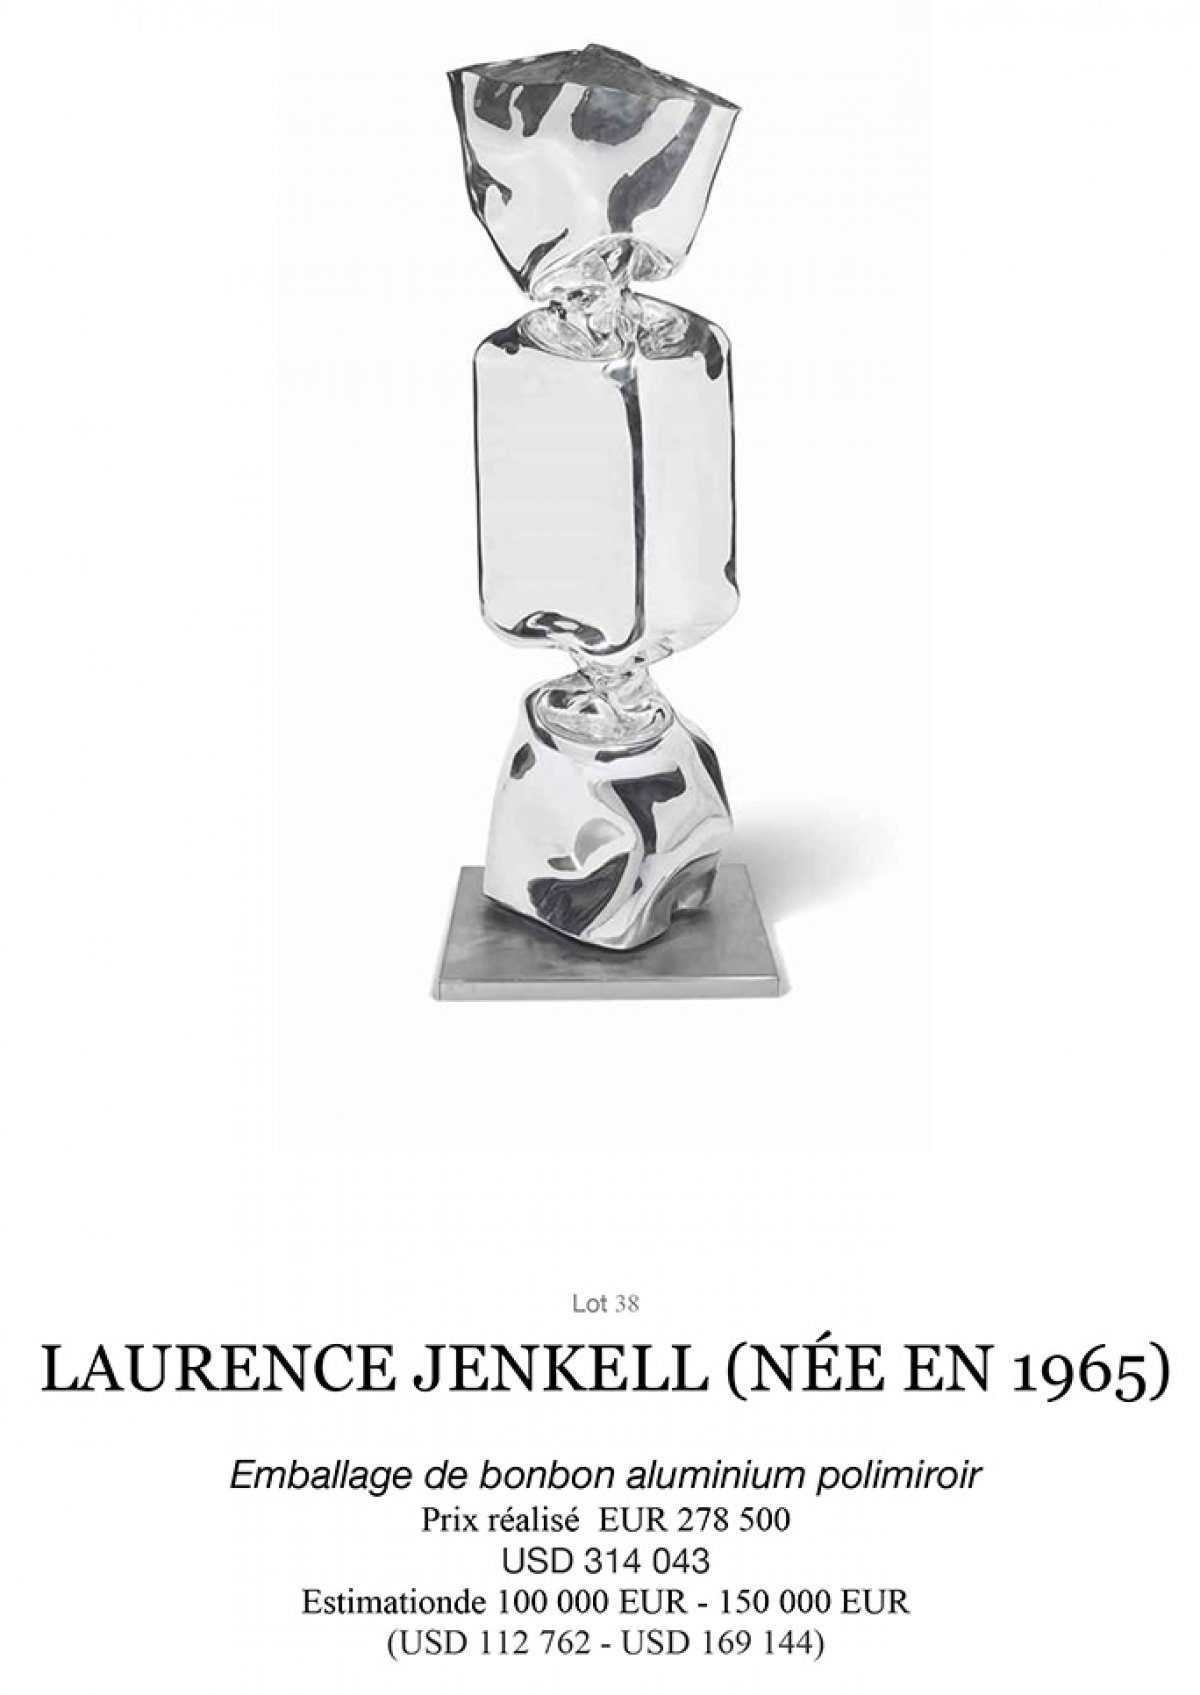 Auction Record for Laurence Jenkell